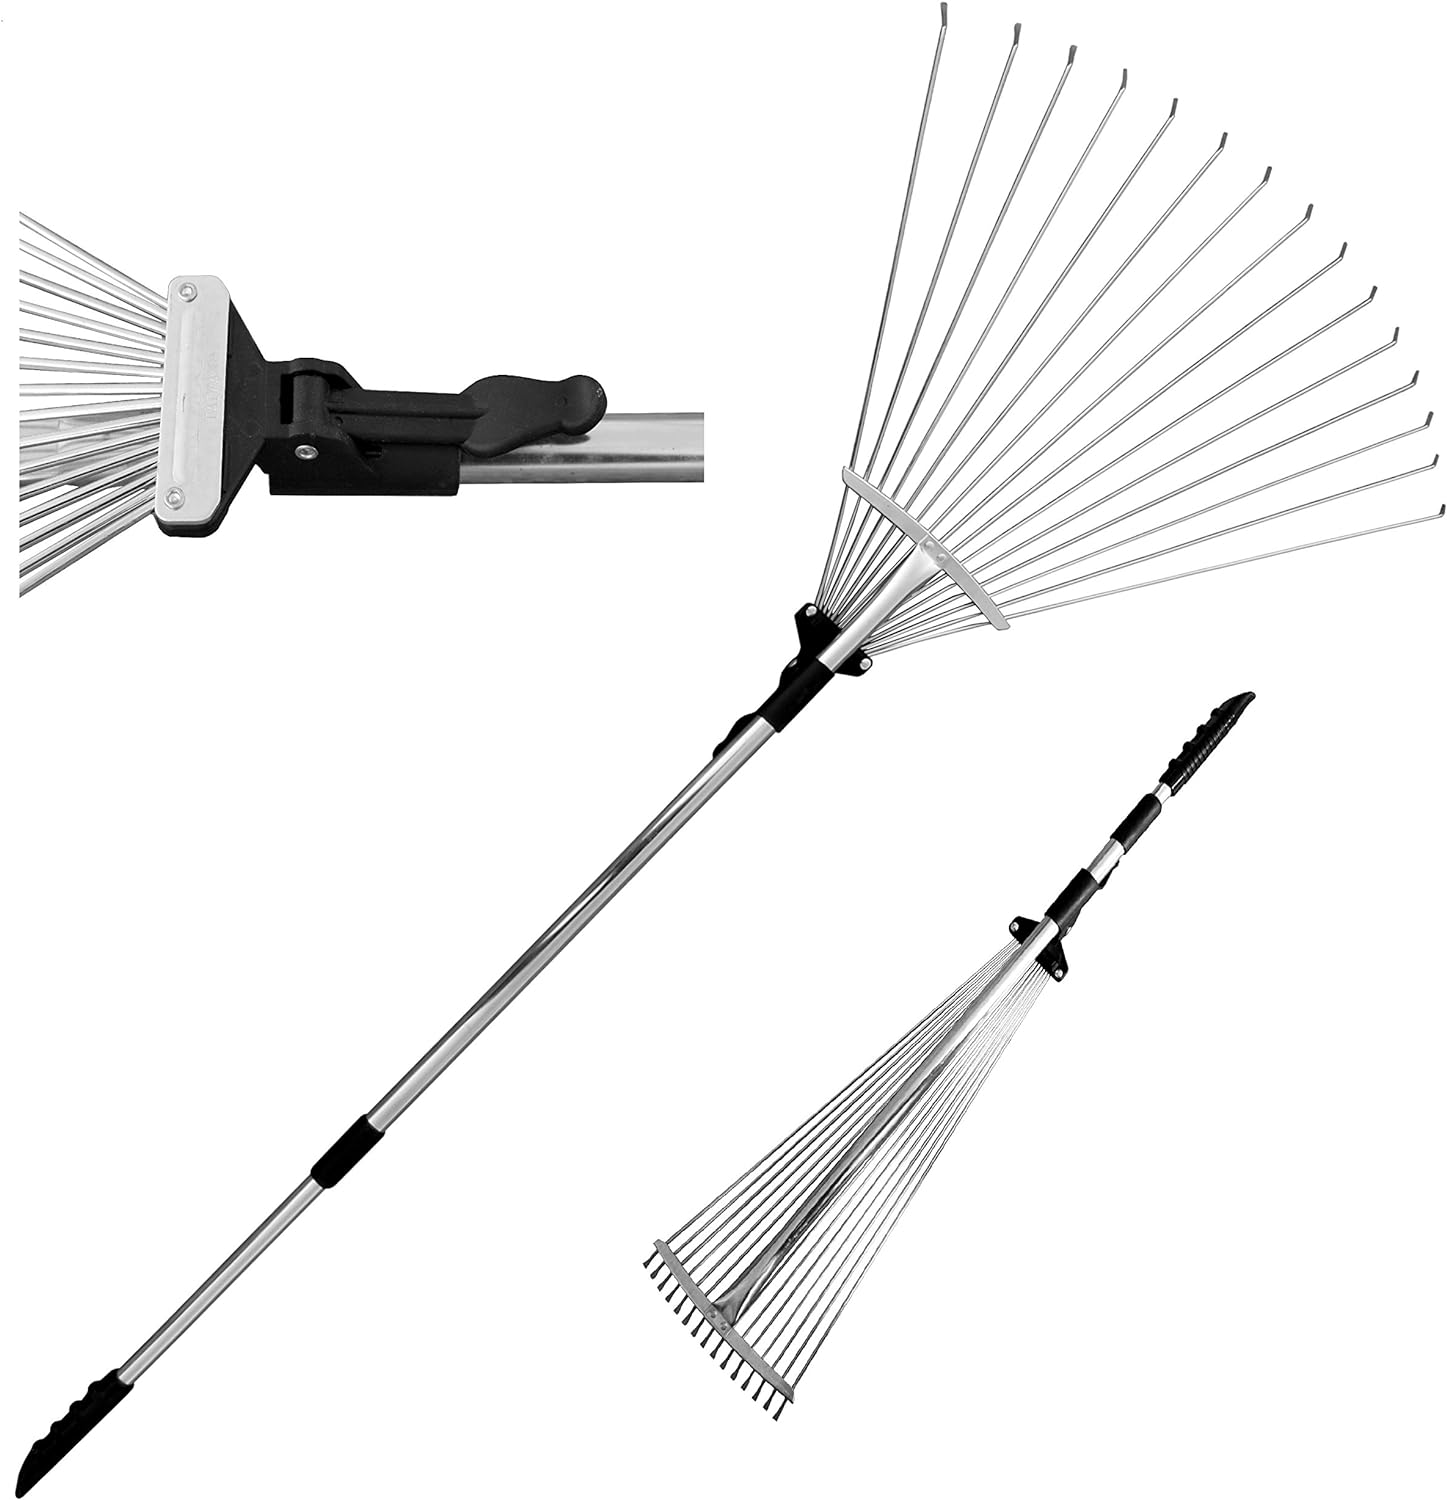 Tabor Tools J16A Telescopic Metal Rake, 63 Inch Adjustable Folding Leaves Rake for Quick Clean Up of Lawn and Yard, Garden Leaf Rake, Expan